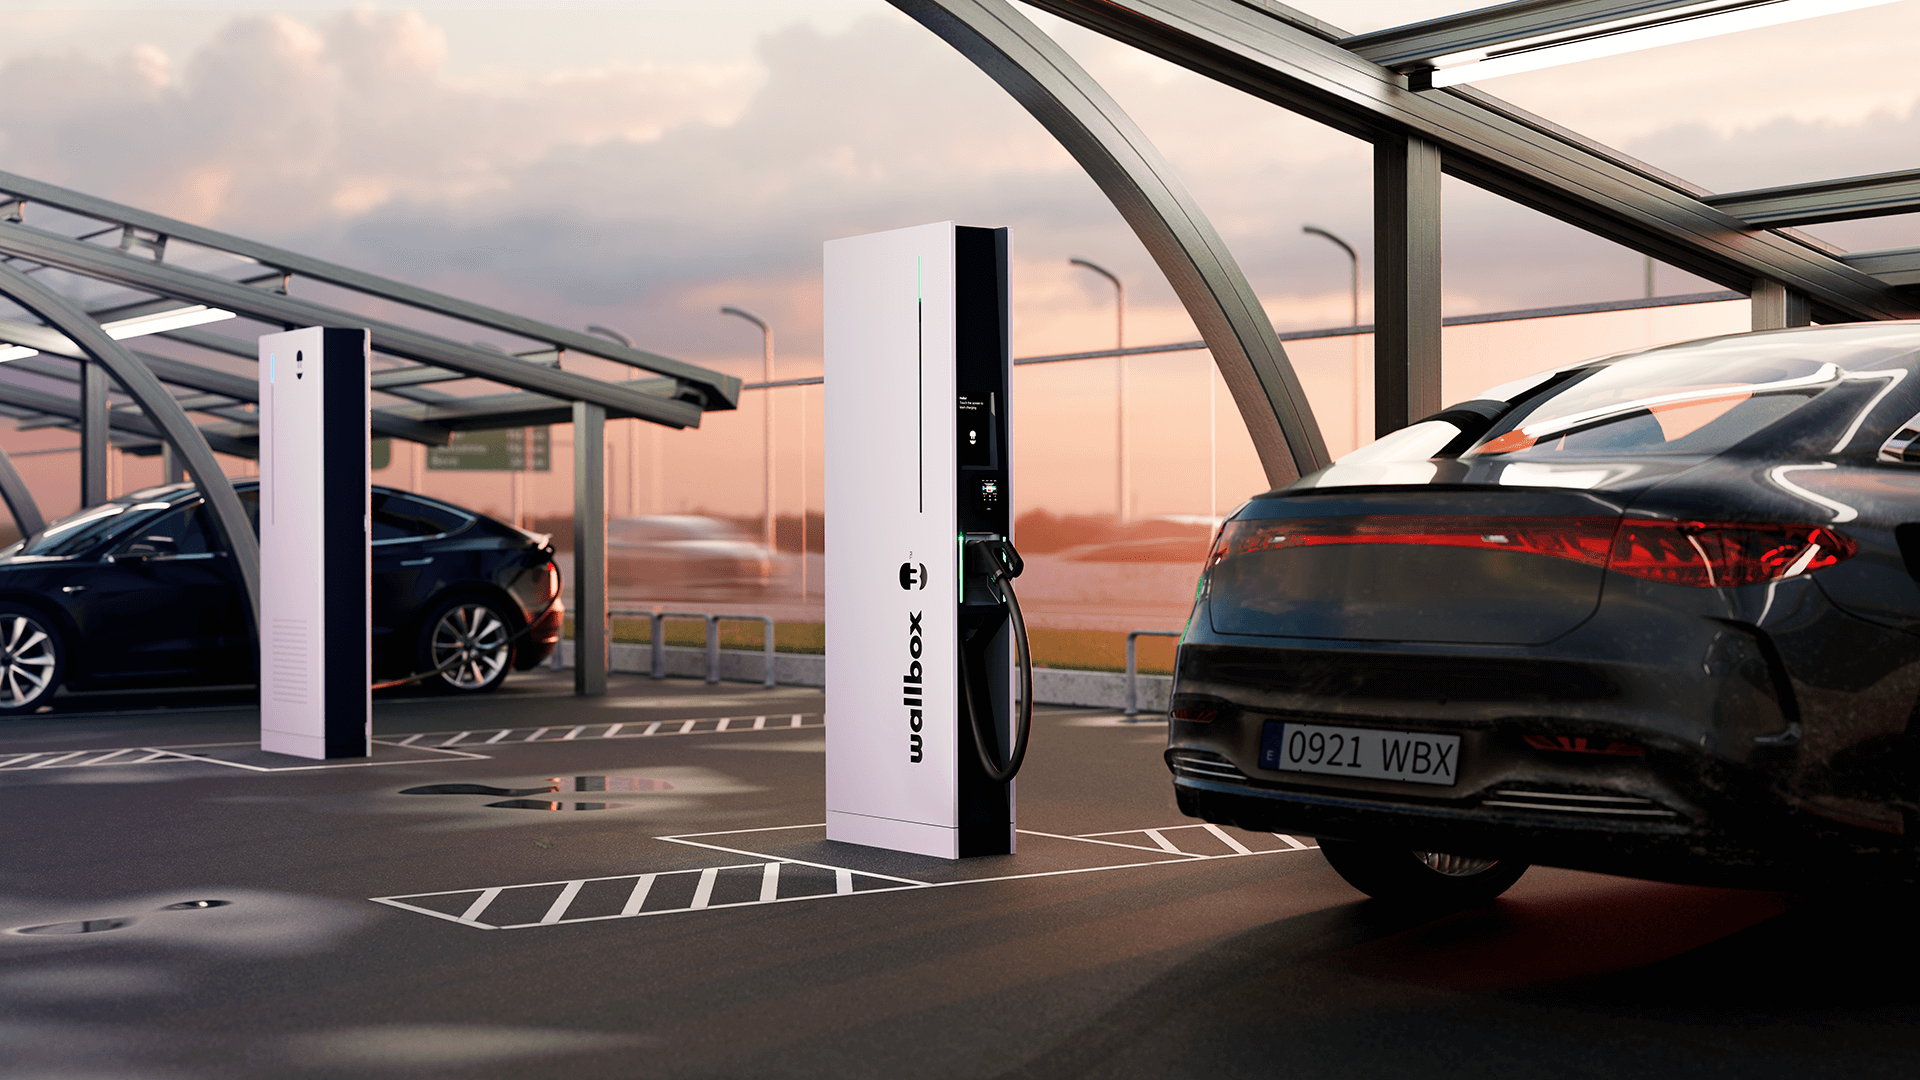 Wallbox unveils Hypernova ultrafast public charger that will fully charge an electric vehicle in under 15 minutes